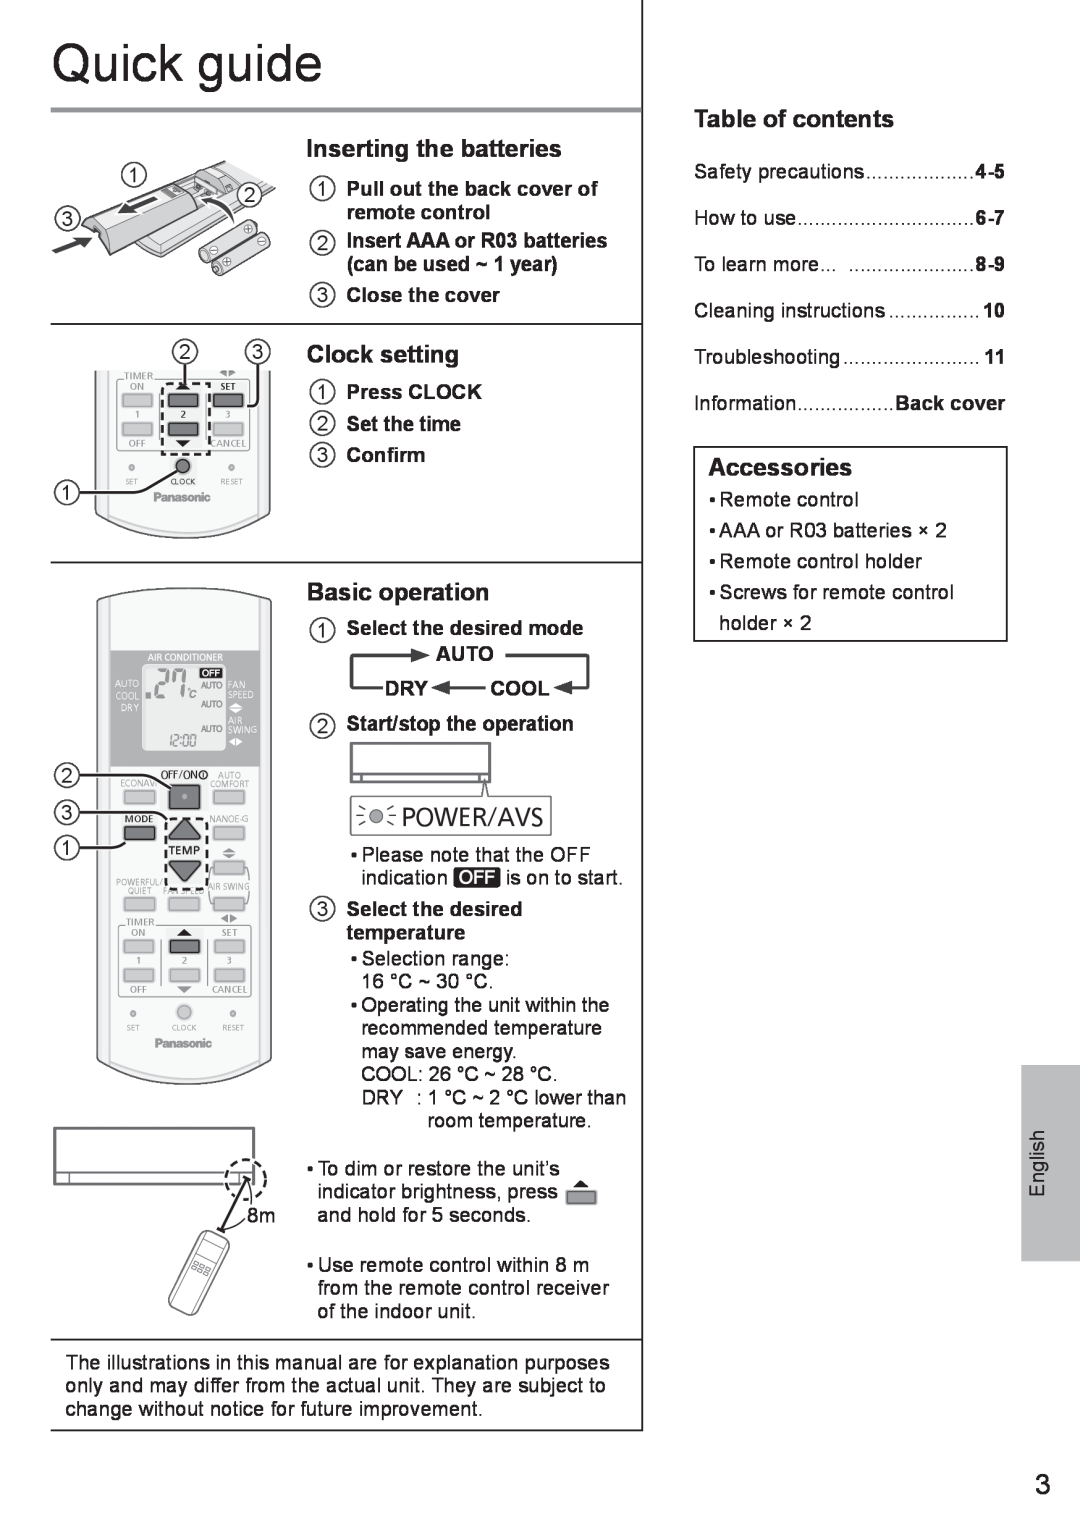 Panasonic CS-C24PKF-3 Quick guide, Inserting the batteries, Table of contents, Clock setting, Accessories, Basic operation 